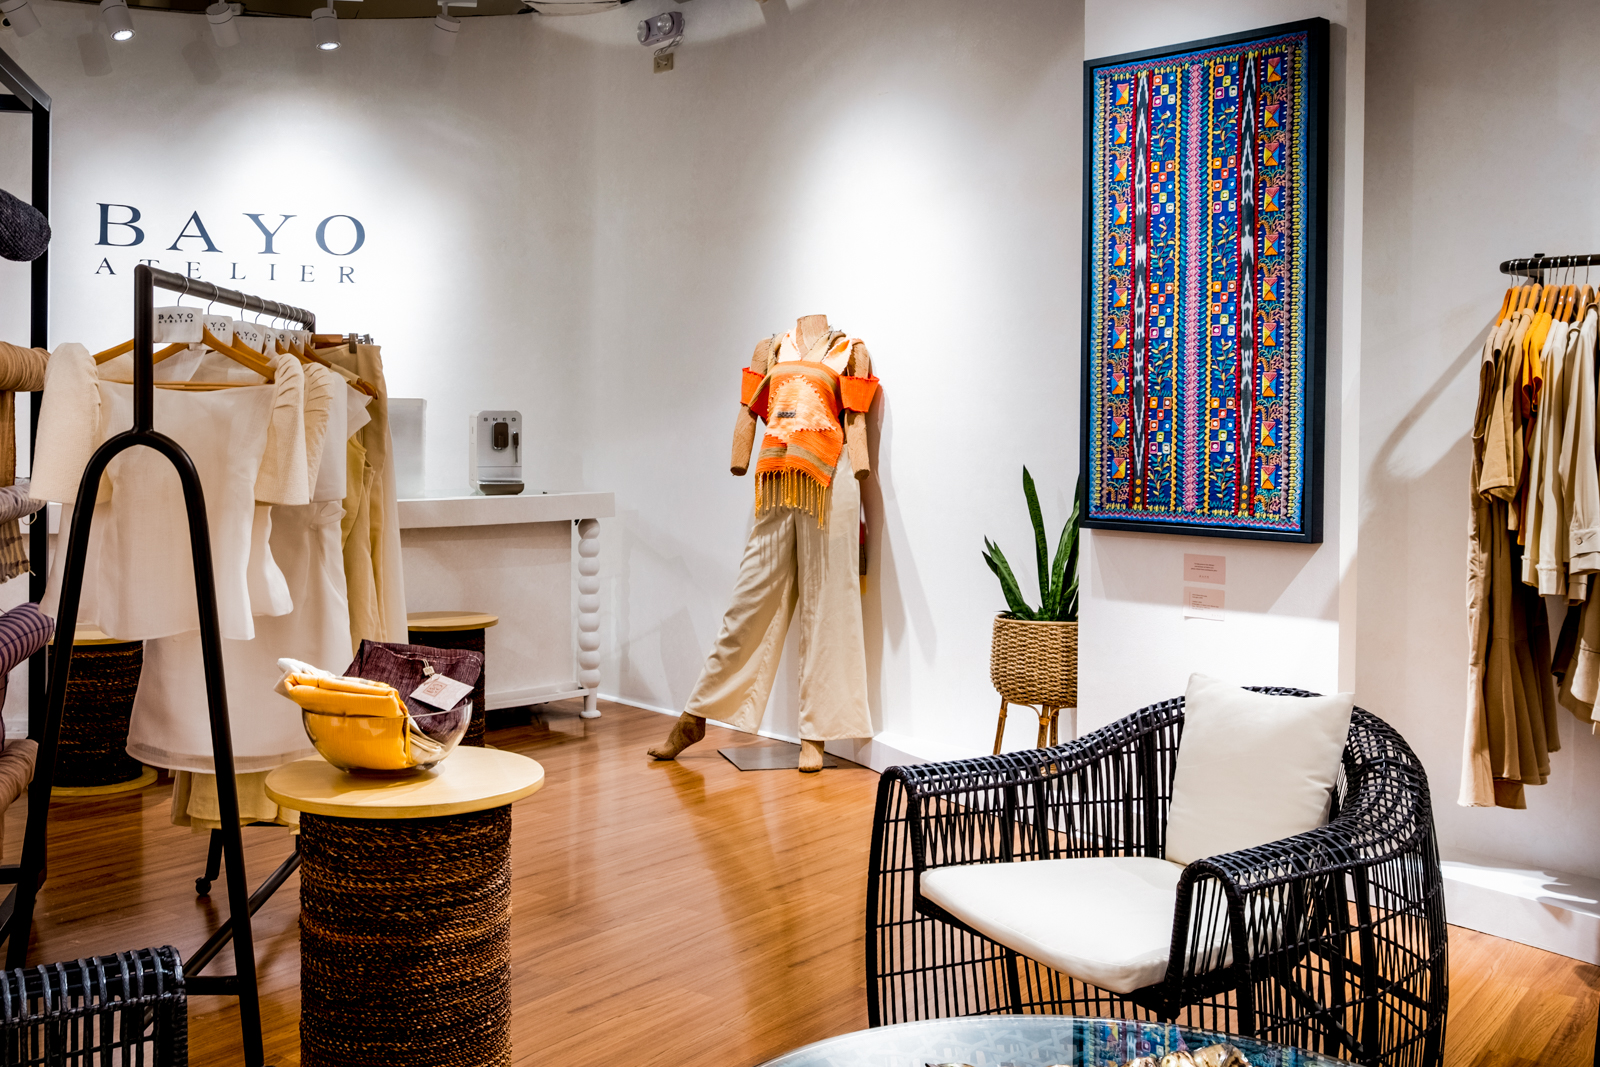 BAYO Atalier studio with custom pieces displayed in the store